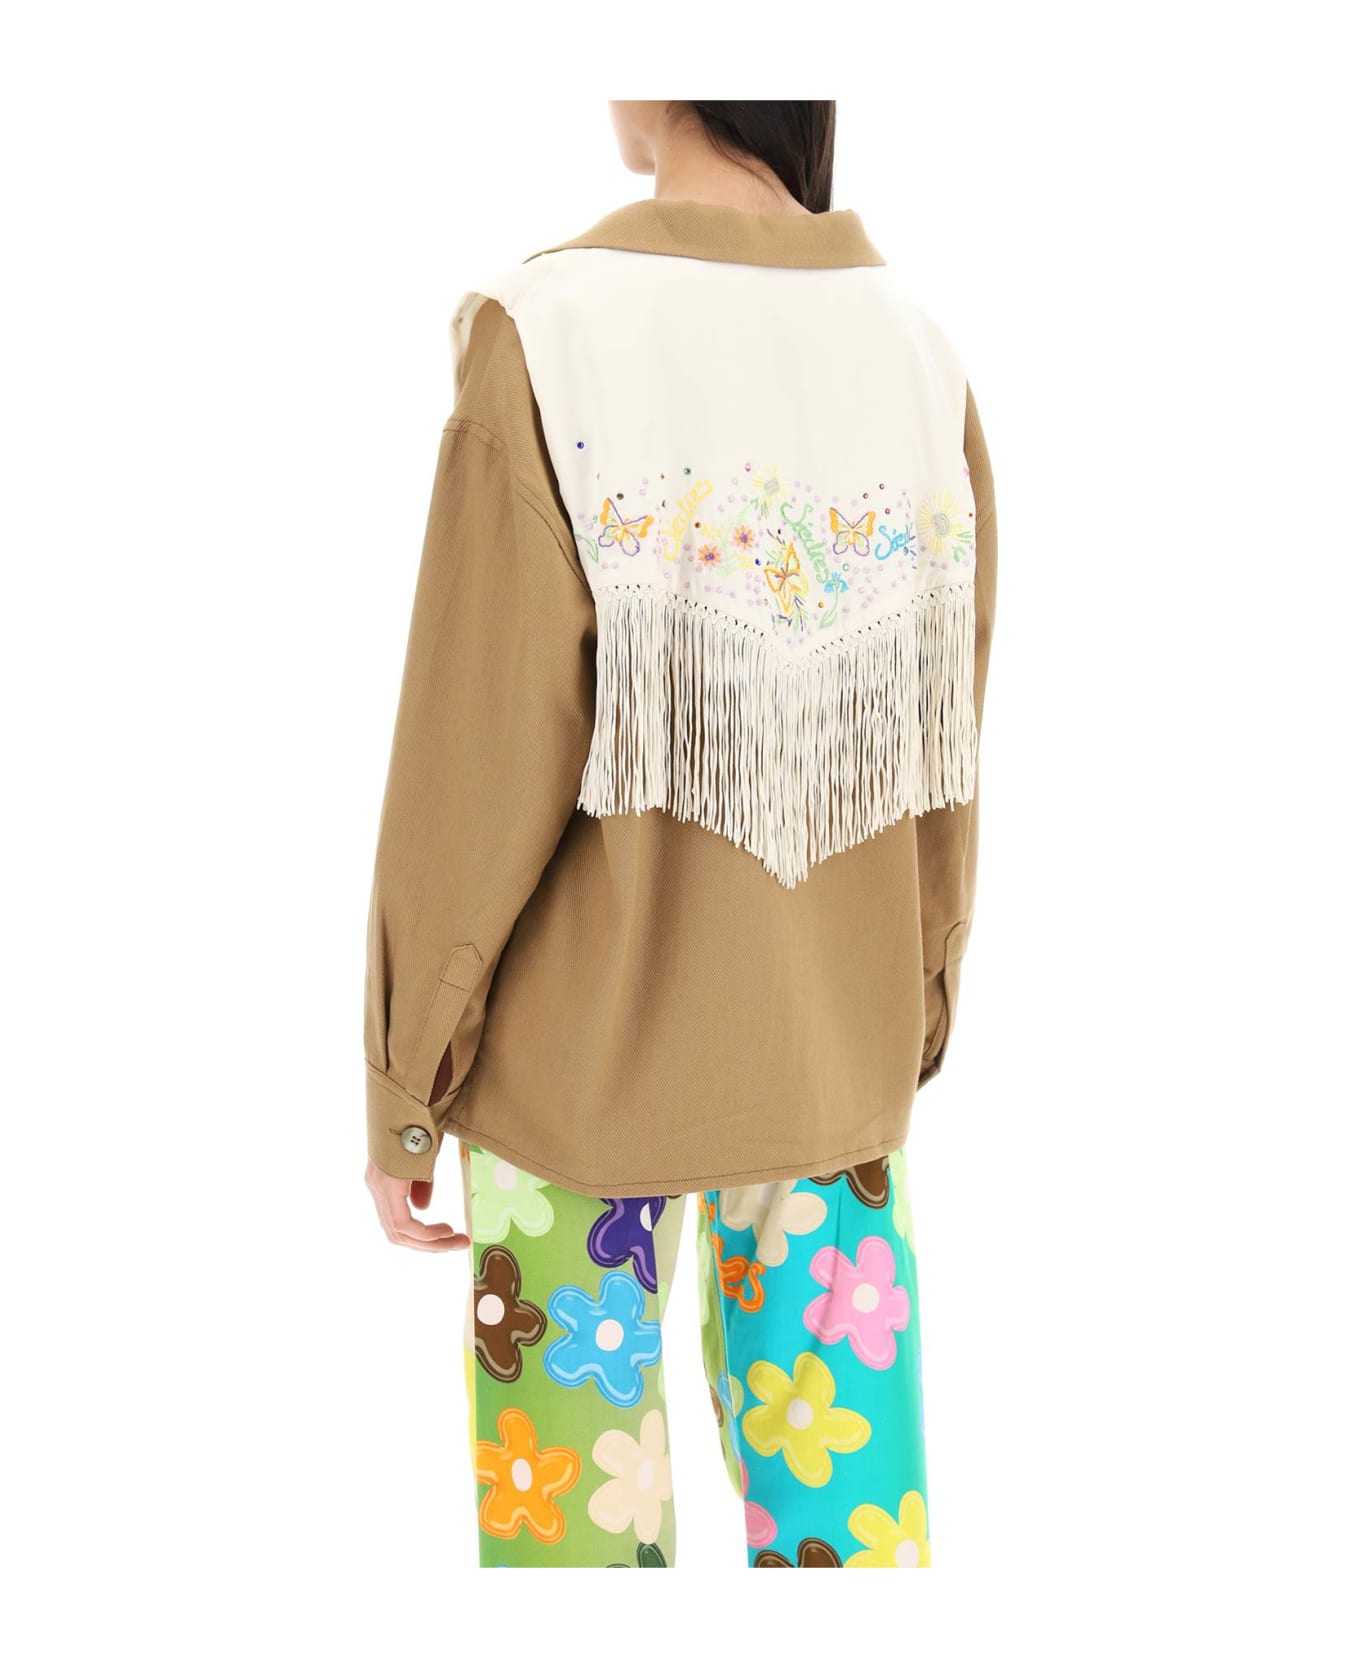 SIEDRES Overshirt With Embroidered Fringed Panel - MULTI (Brown) ジャケット